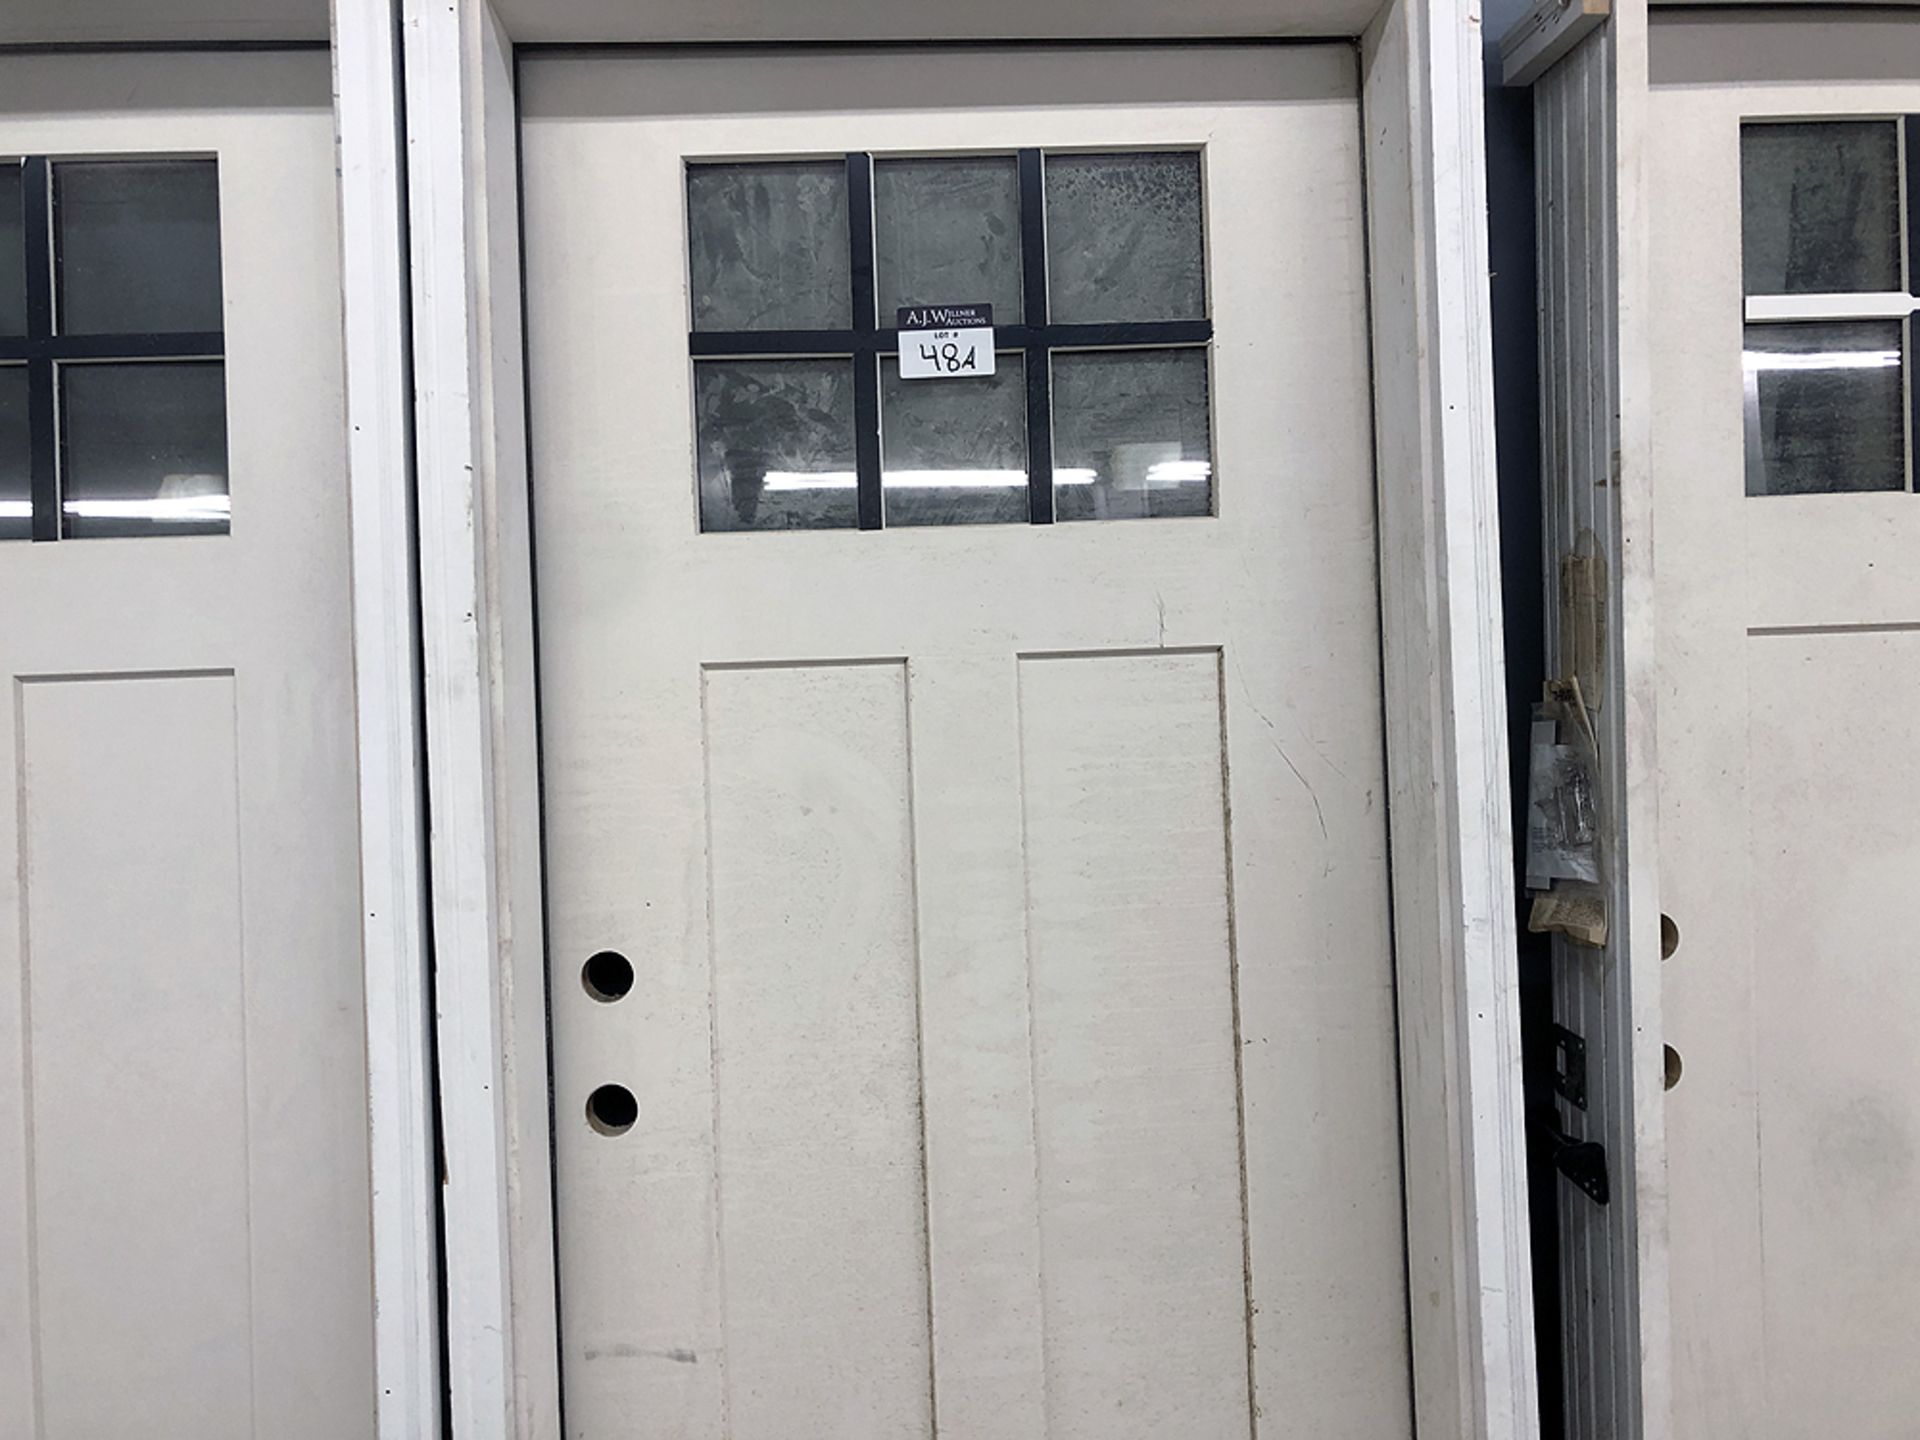 Shaker Style, 36" Prehung, Exterior Doors - Image 3 of 3